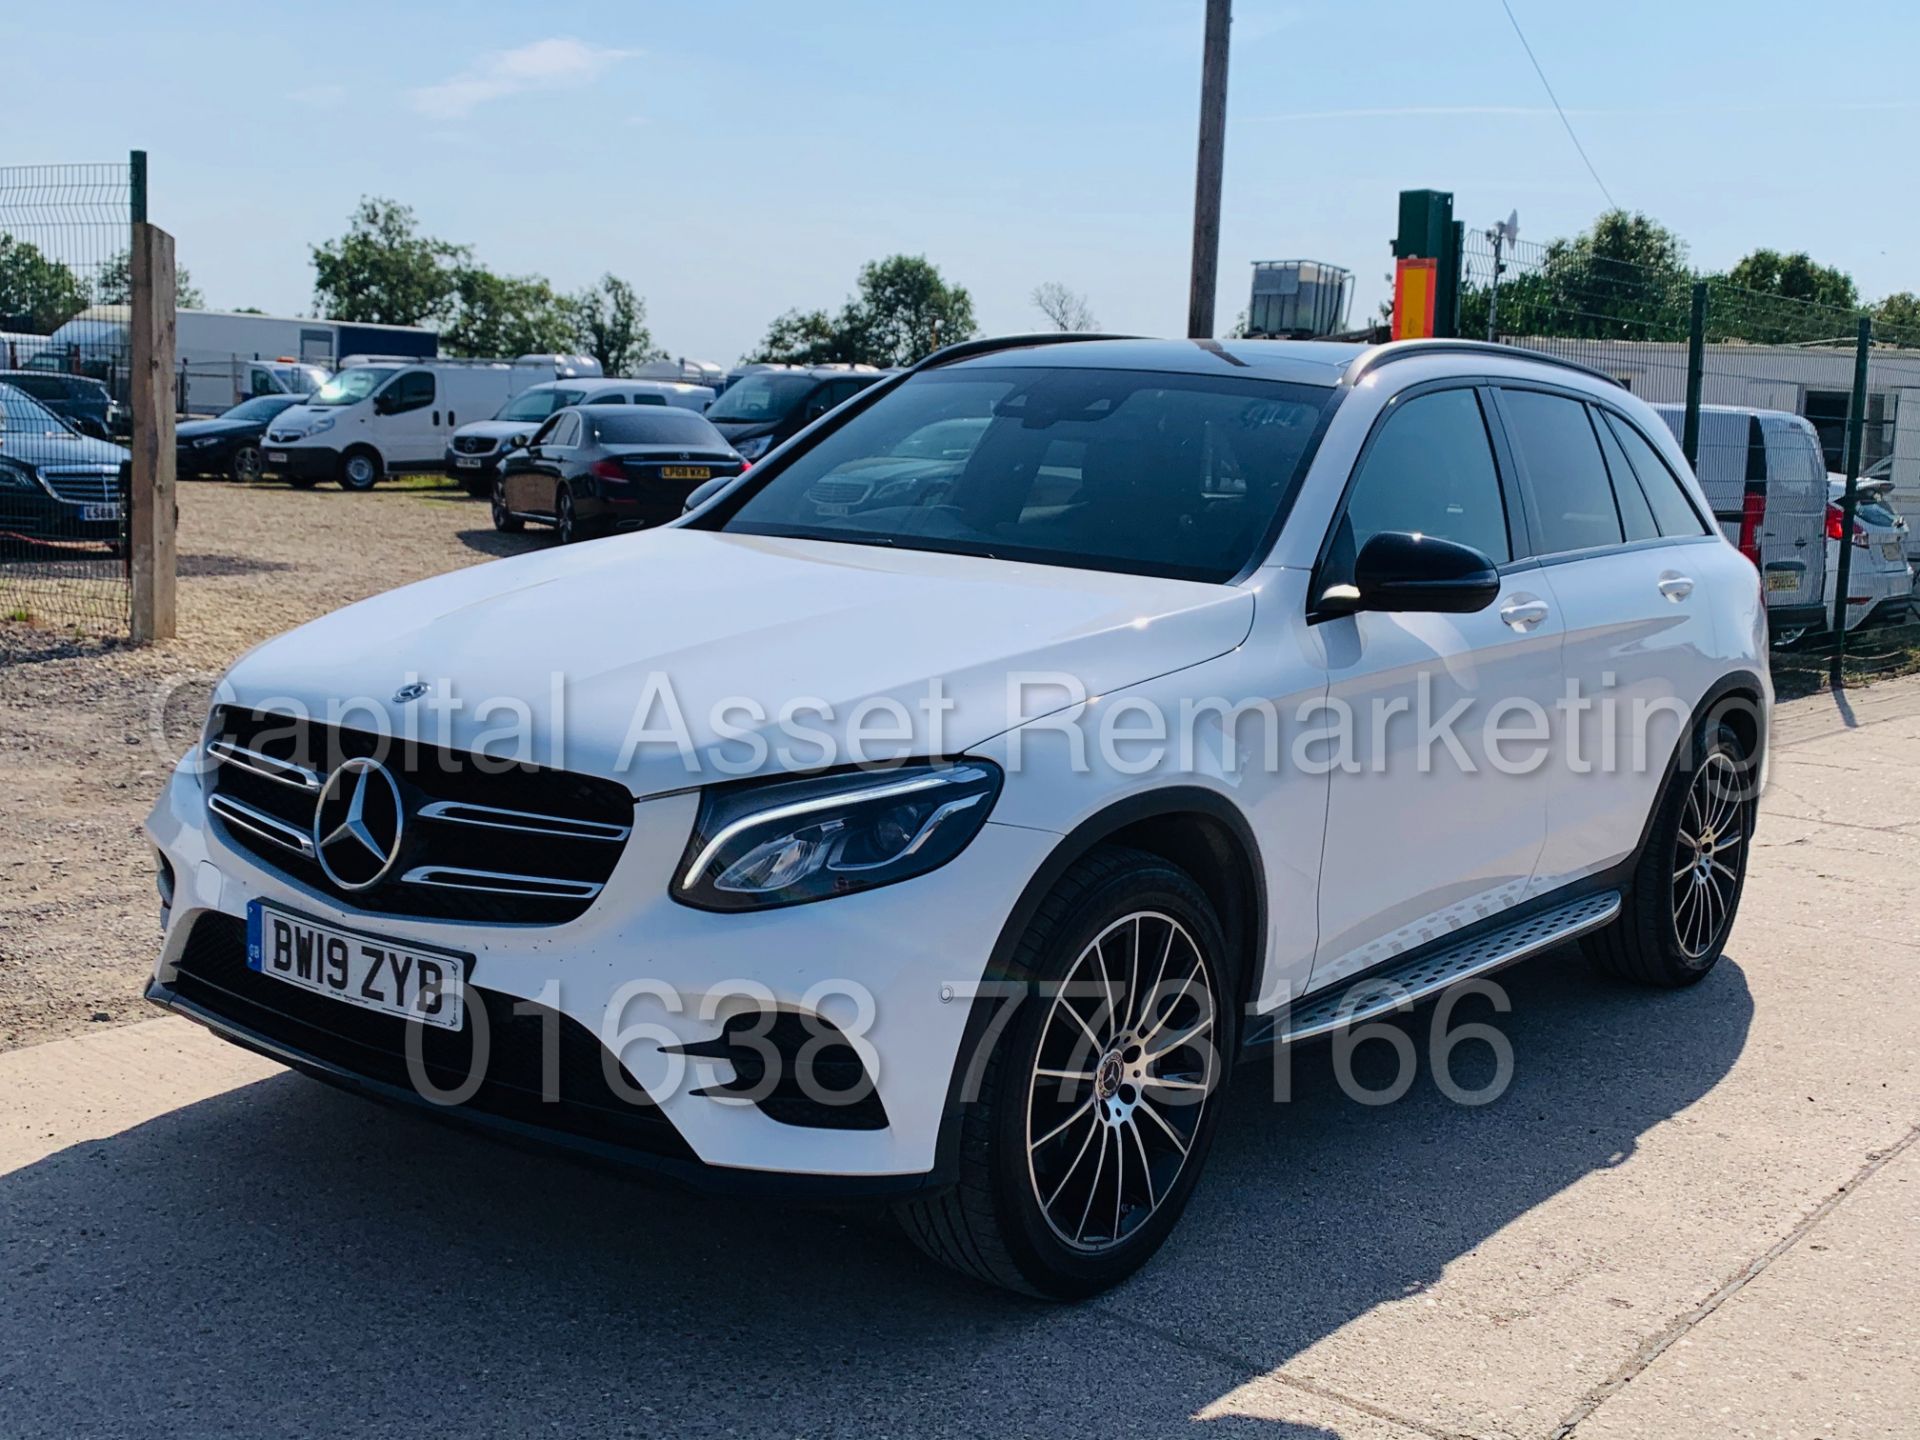 (On Sale) MERCEDES-BENZ GLC 250 *AMG - NIGHT EDITION* SUV (2019) '9G TRONIC - 4-MATIC' *HUGE SPEC* - Image 5 of 53